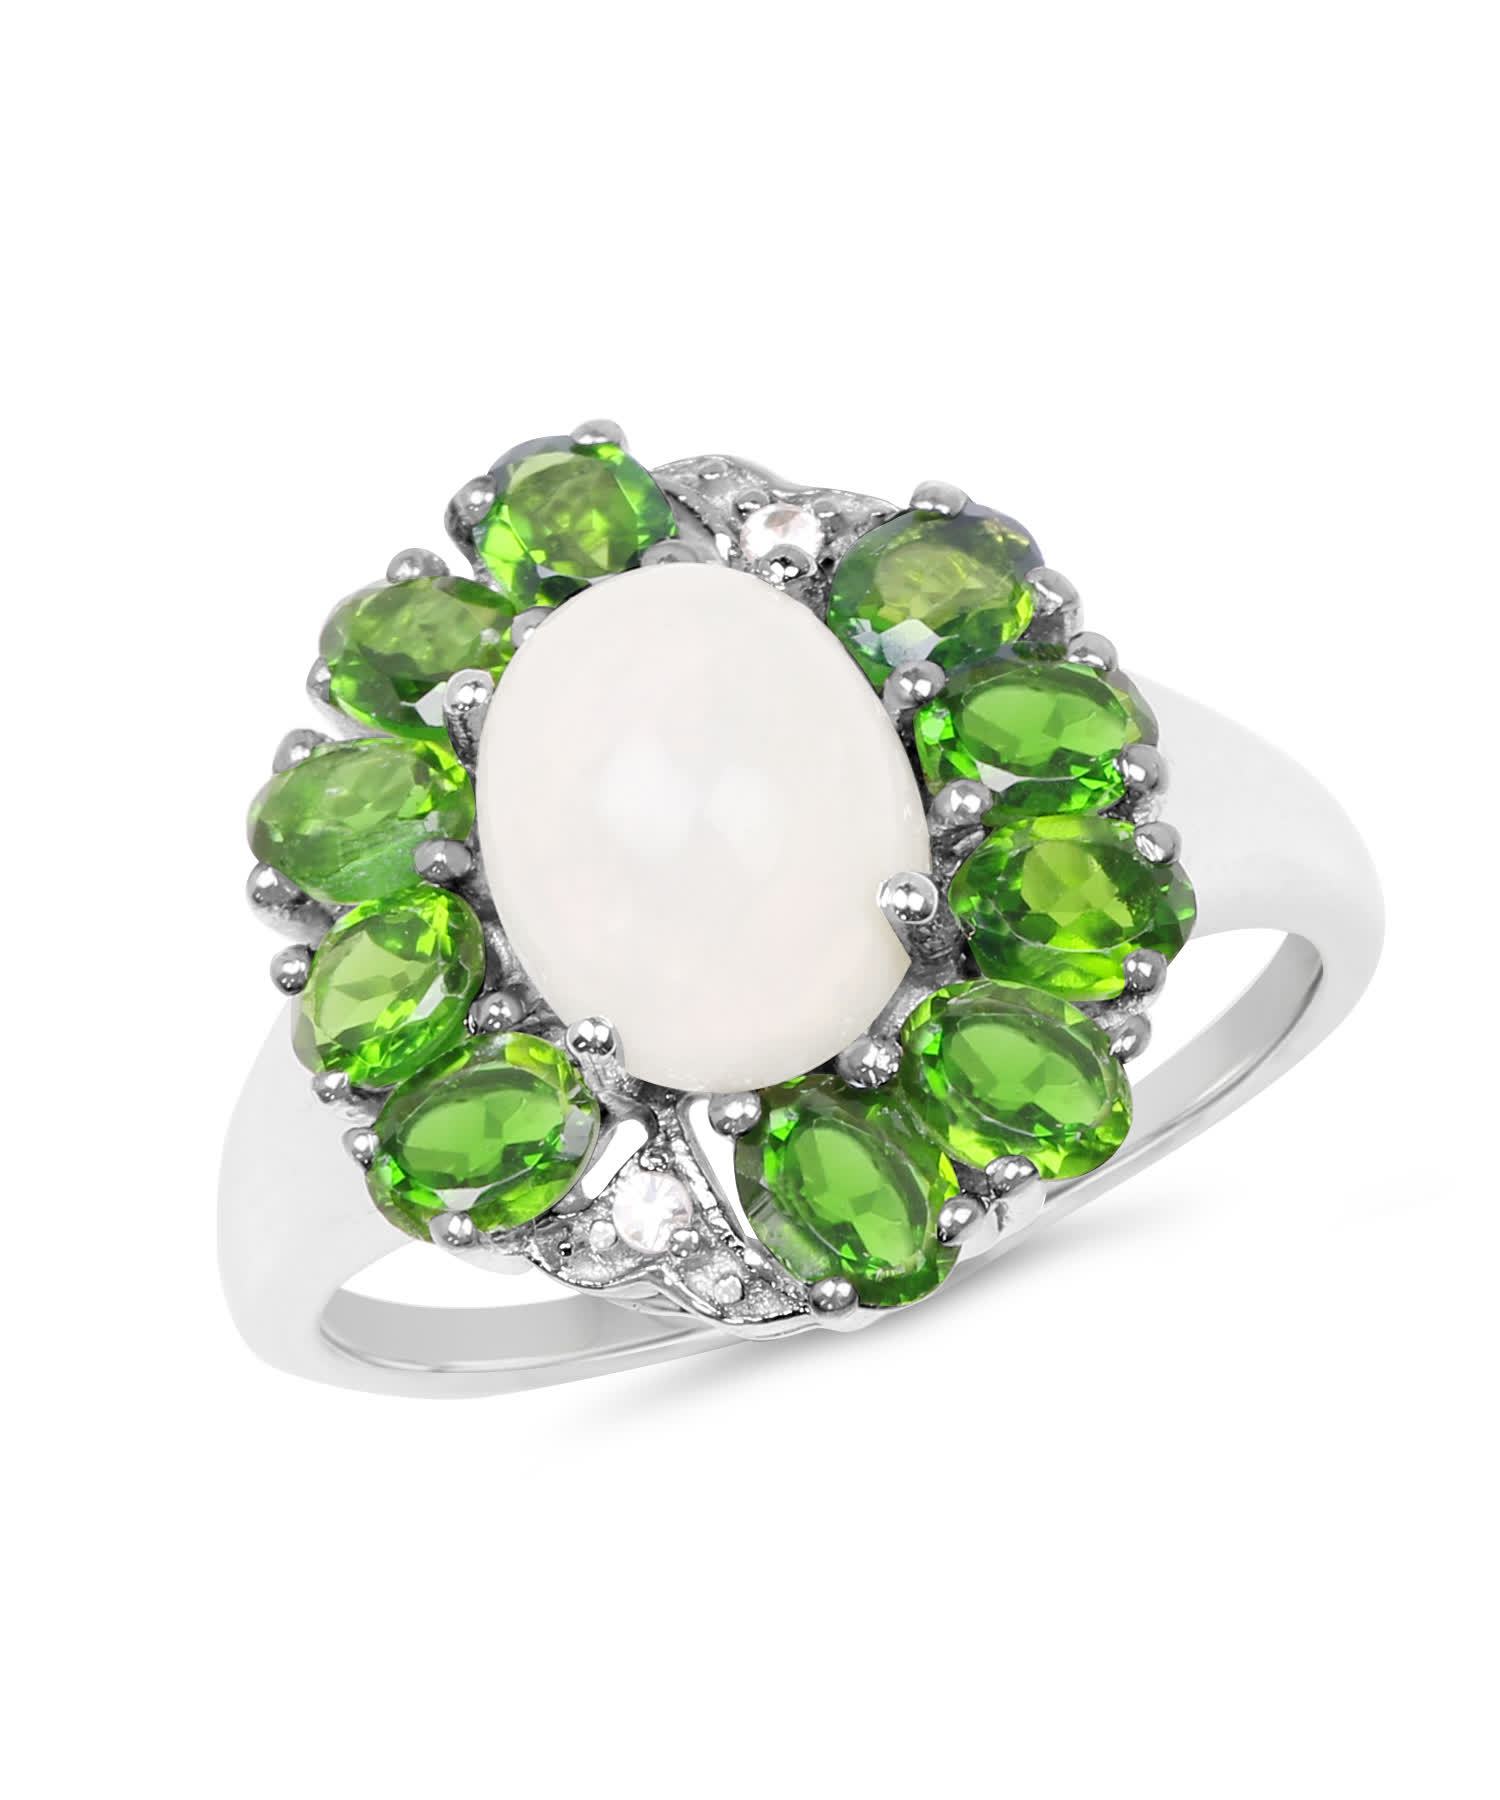 2.93ctw Natural Ethiopian Opal, Forest Green Chrome Diopside and Topaz Rhodium Plated 925 Sterling Silver Ring View 1